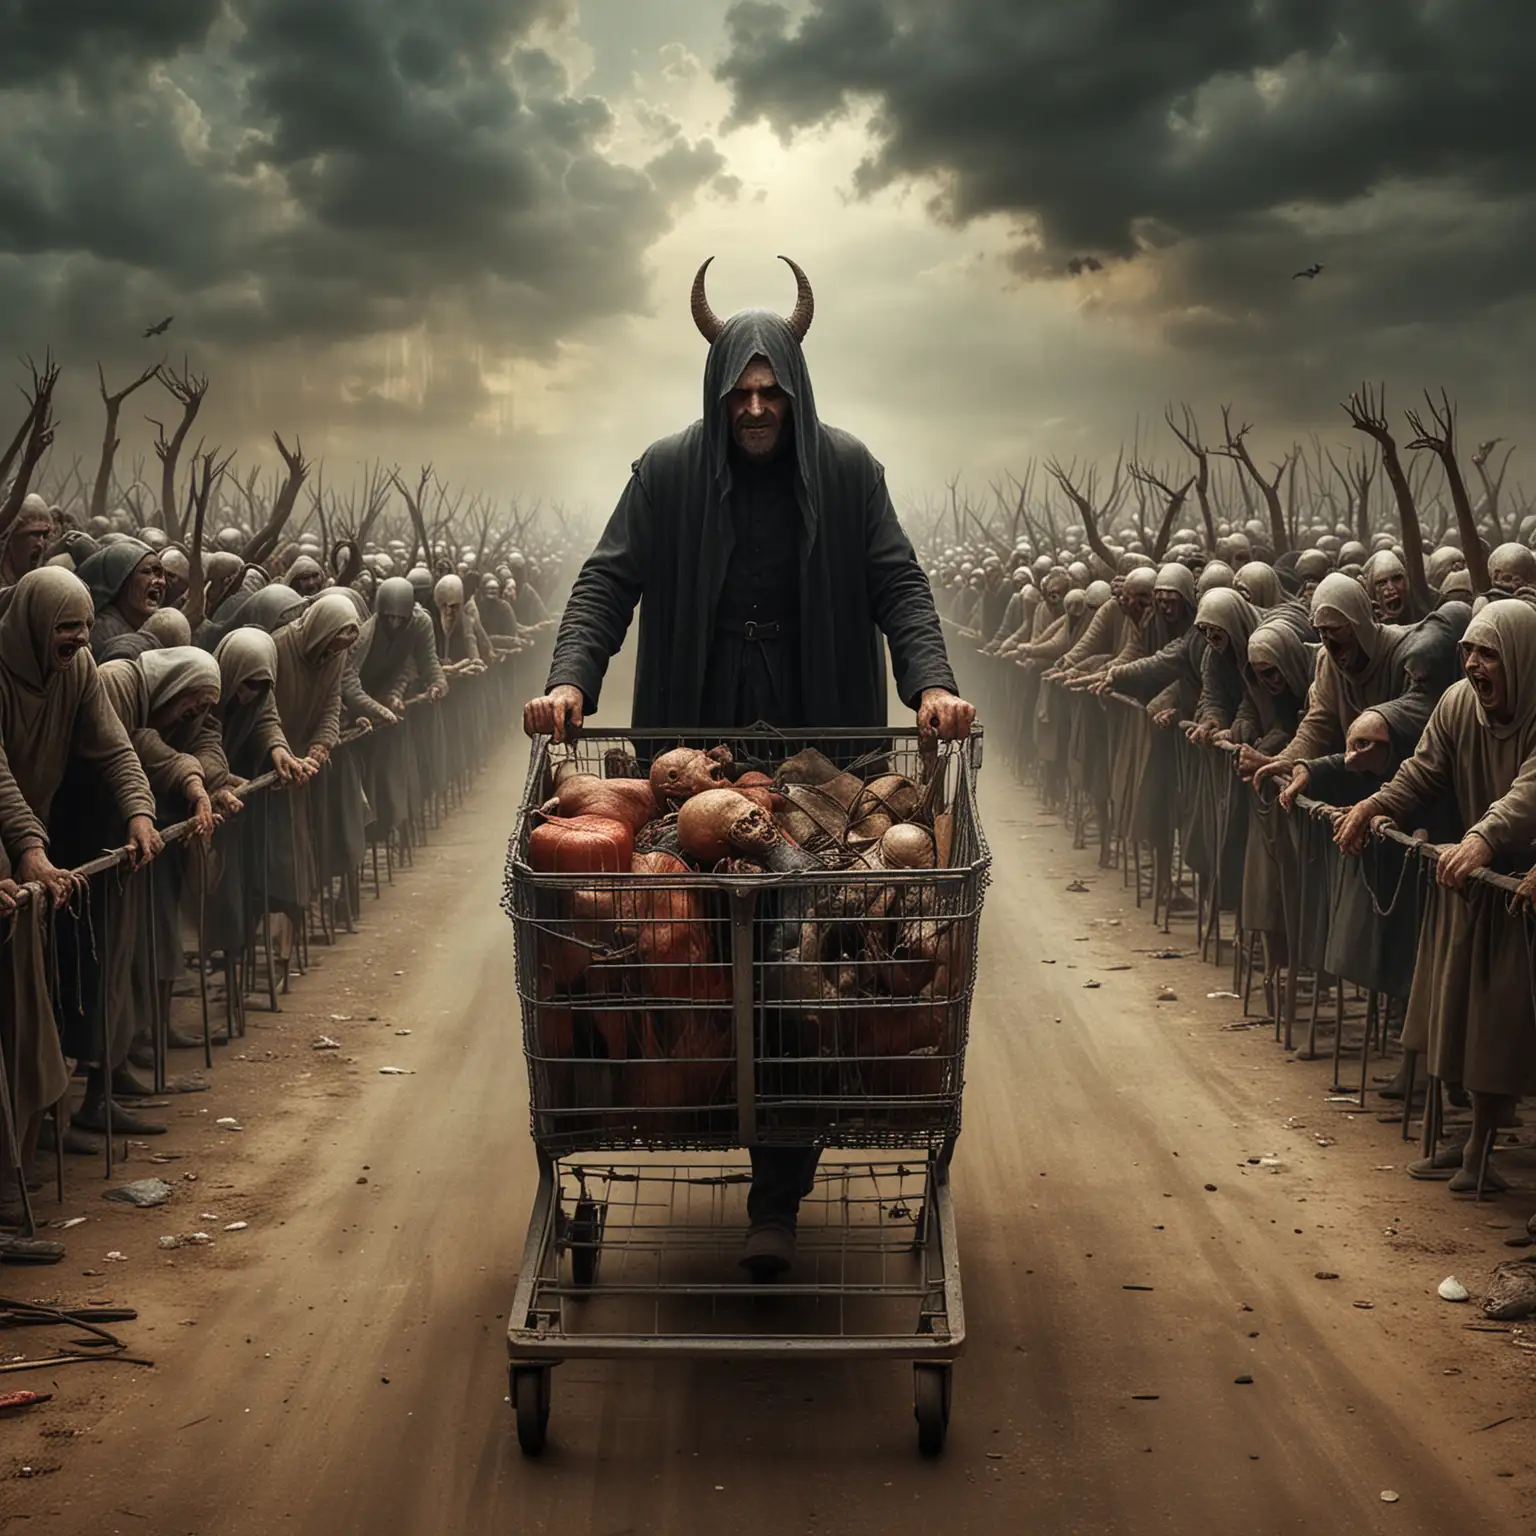 Going to Hell in a Hand basket. Lucifer pushing a shopping cart full of anguished people in agony. imagery like Dante or Hieronymus Bosch